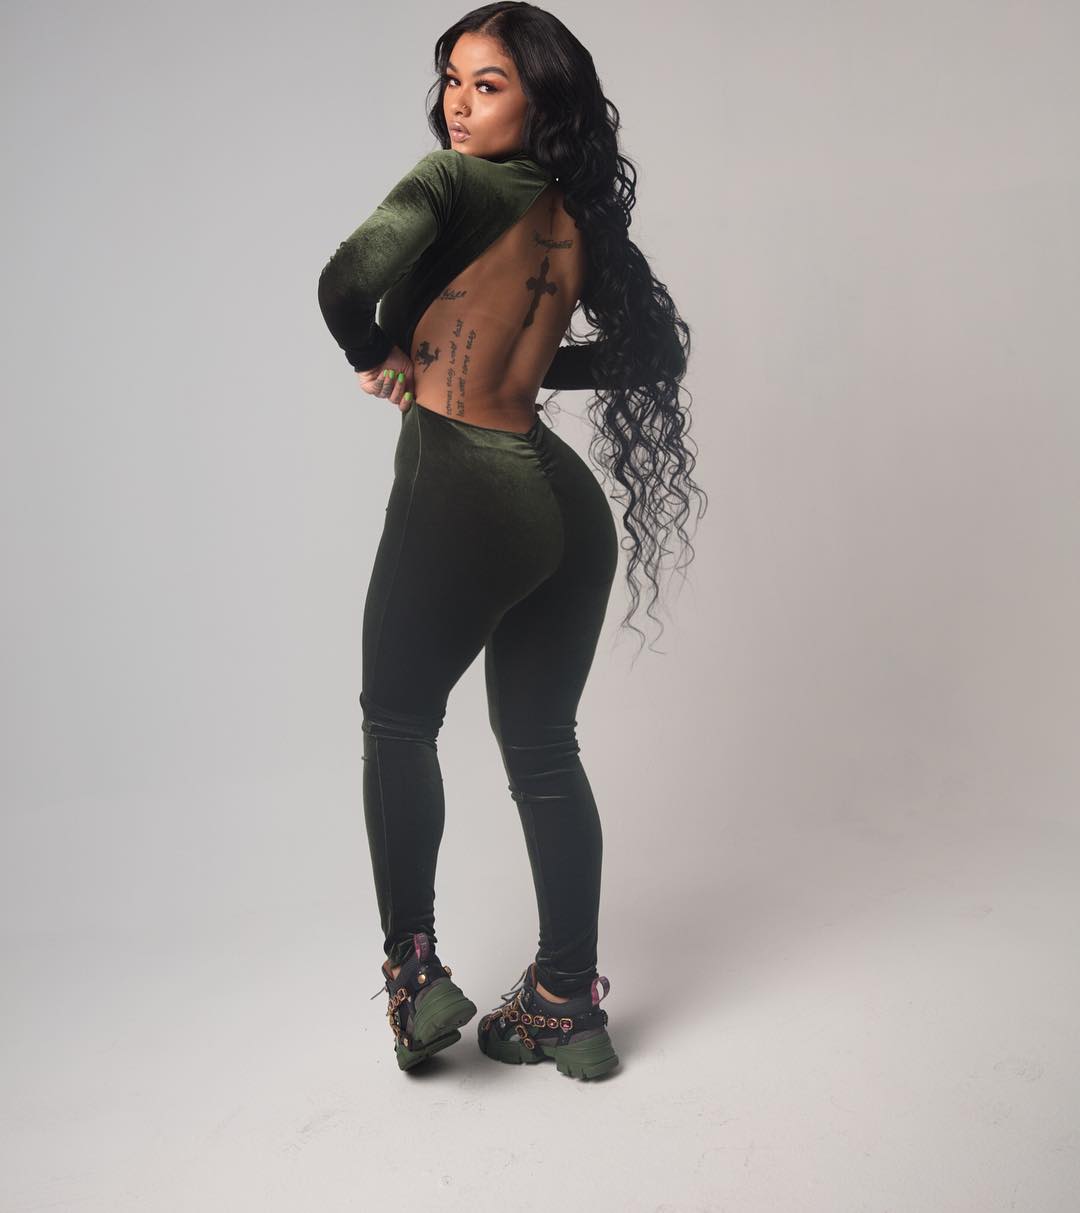 49 Hot Pictures Of India Love Are Just Too Damn Delicious | Best Of Comic Books